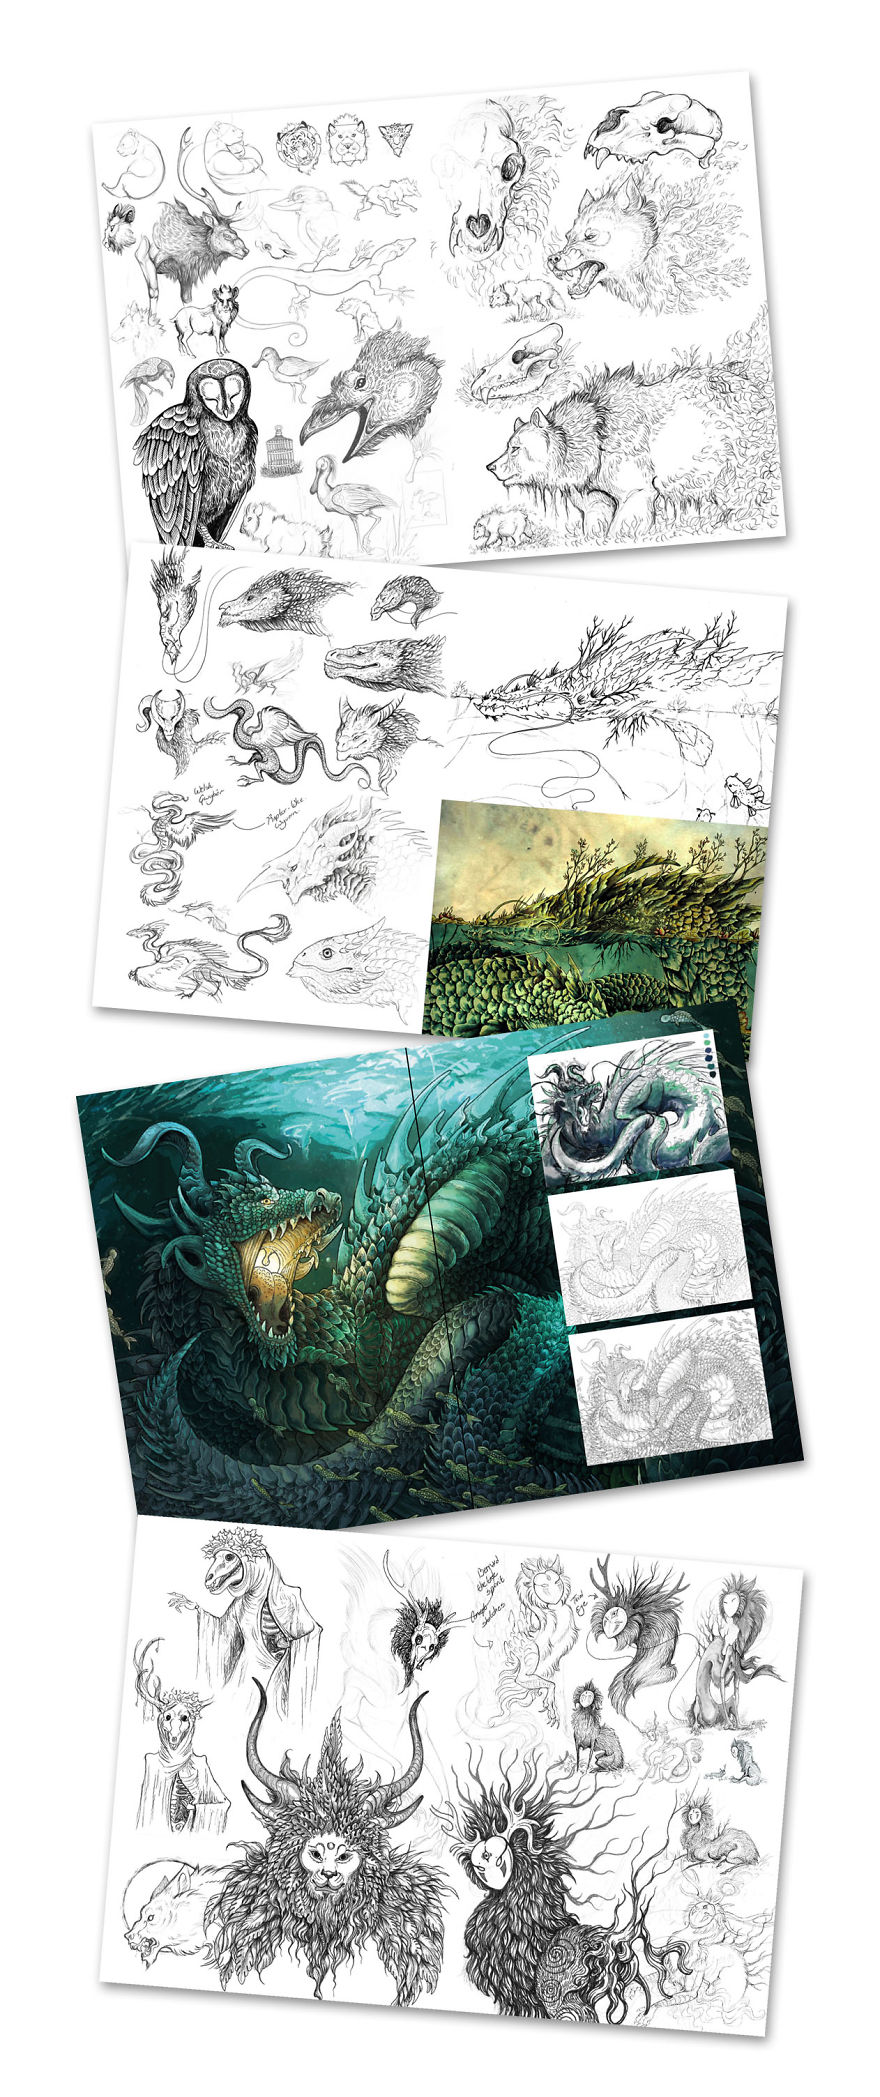 I've Created A Sketchbook Full Of Dragons And Mythical Creatures